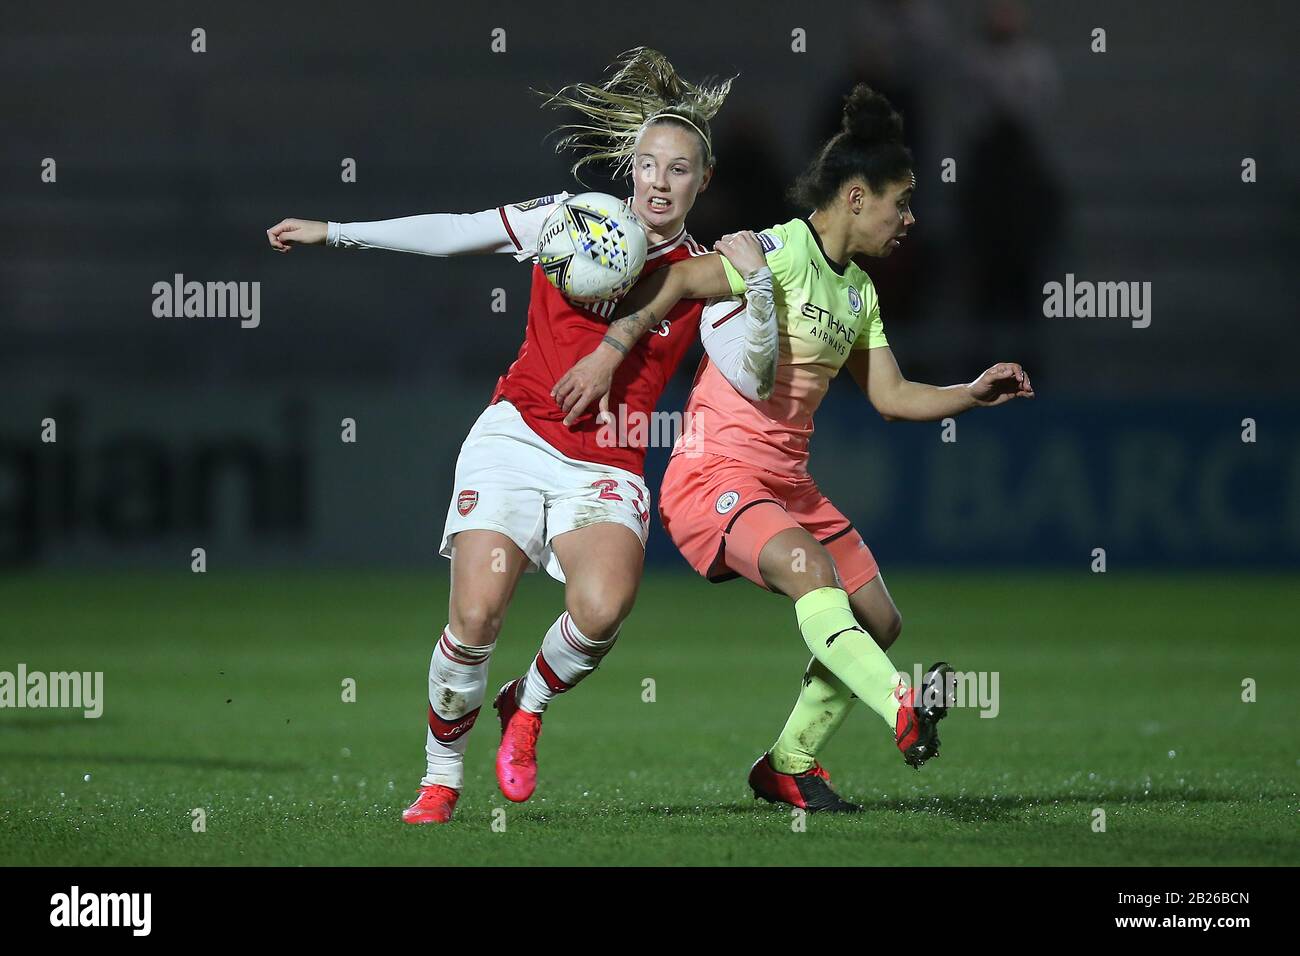 Beth Mead of Arsenal and Demi Stokes of Manchester City during Arsenal Women vs Manchester City Women, FA Women's Continental League Cup Football at M Stock Photo